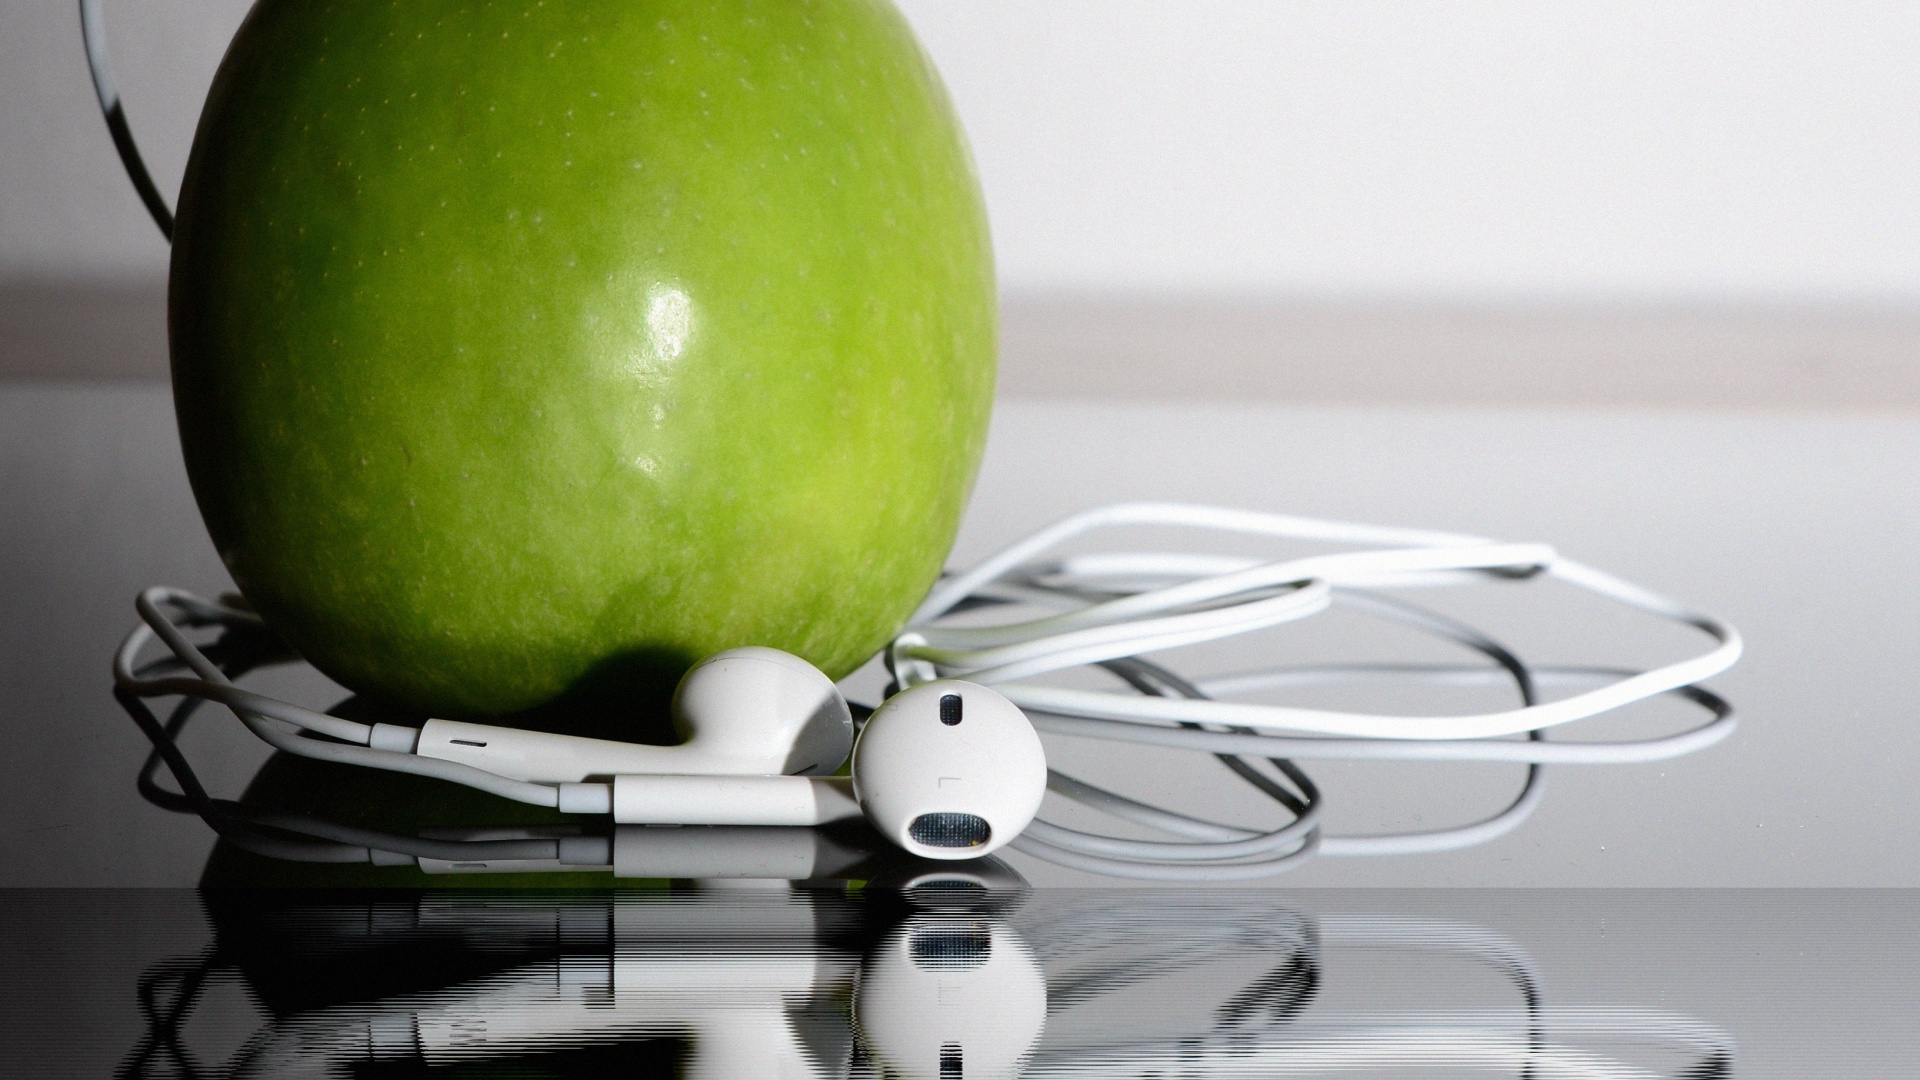 Apple Auriculares, Auriculares, Verde, Granny Smith, Apple. Wallpaper in 1920x1080 Resolution